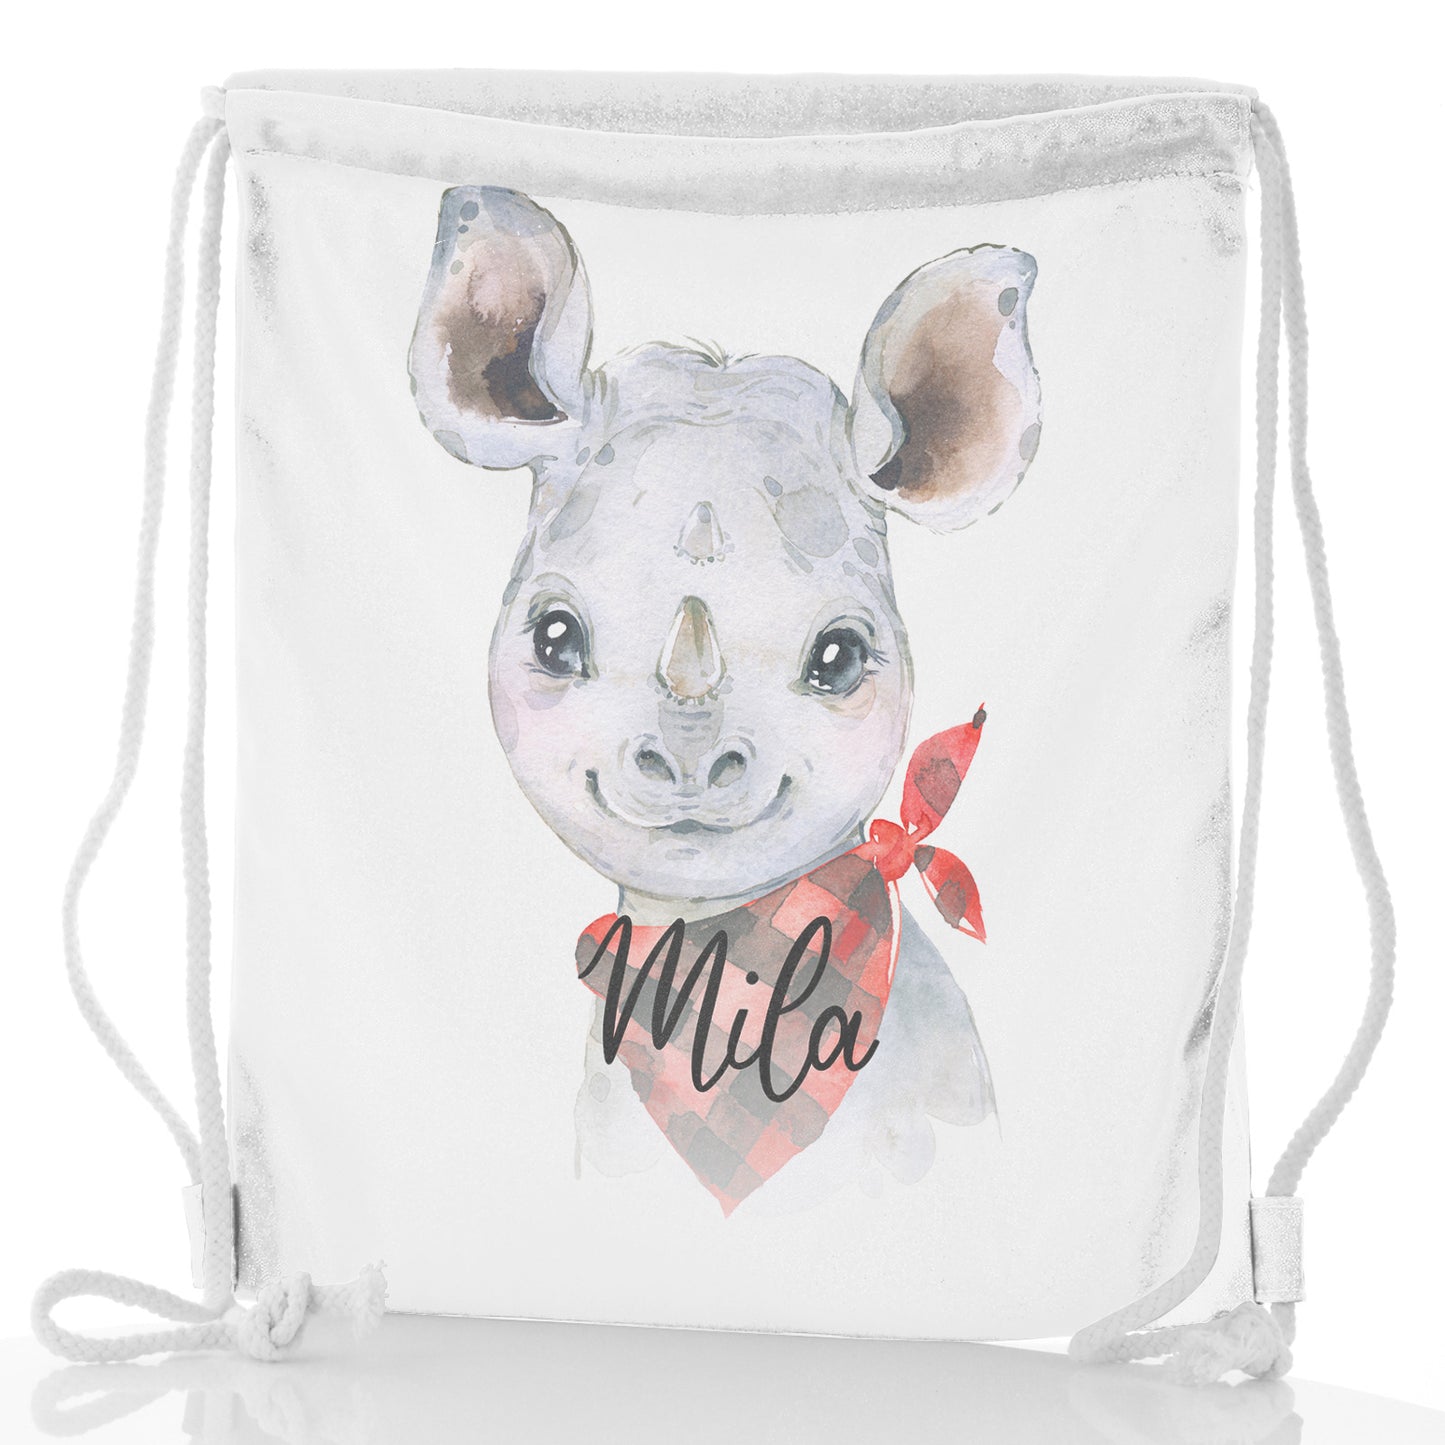 Personalised Glitter Drawstring Backpack with Rhino Red and Black Check Neck and Cute Text